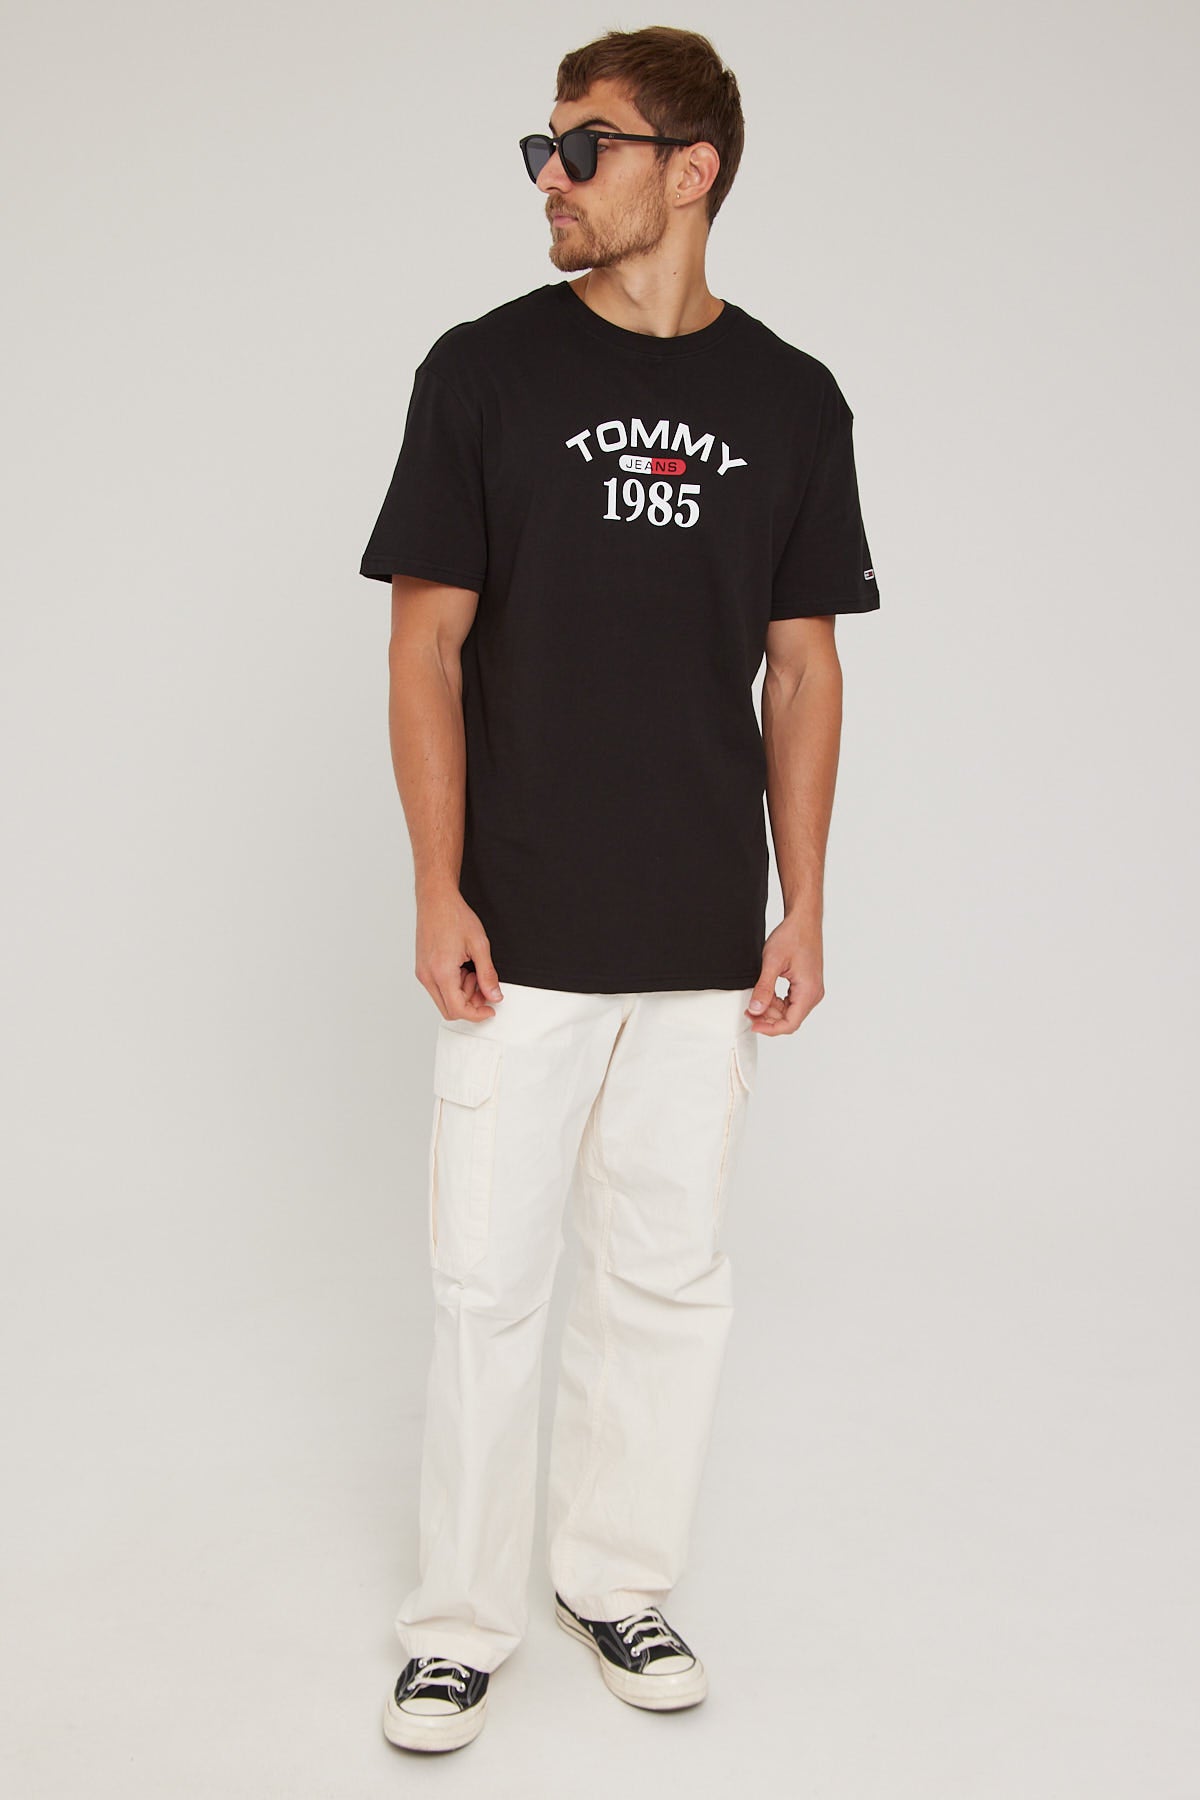 Tommy Jeans TJM CLSC Universal Tee White Store Athletic – Flag